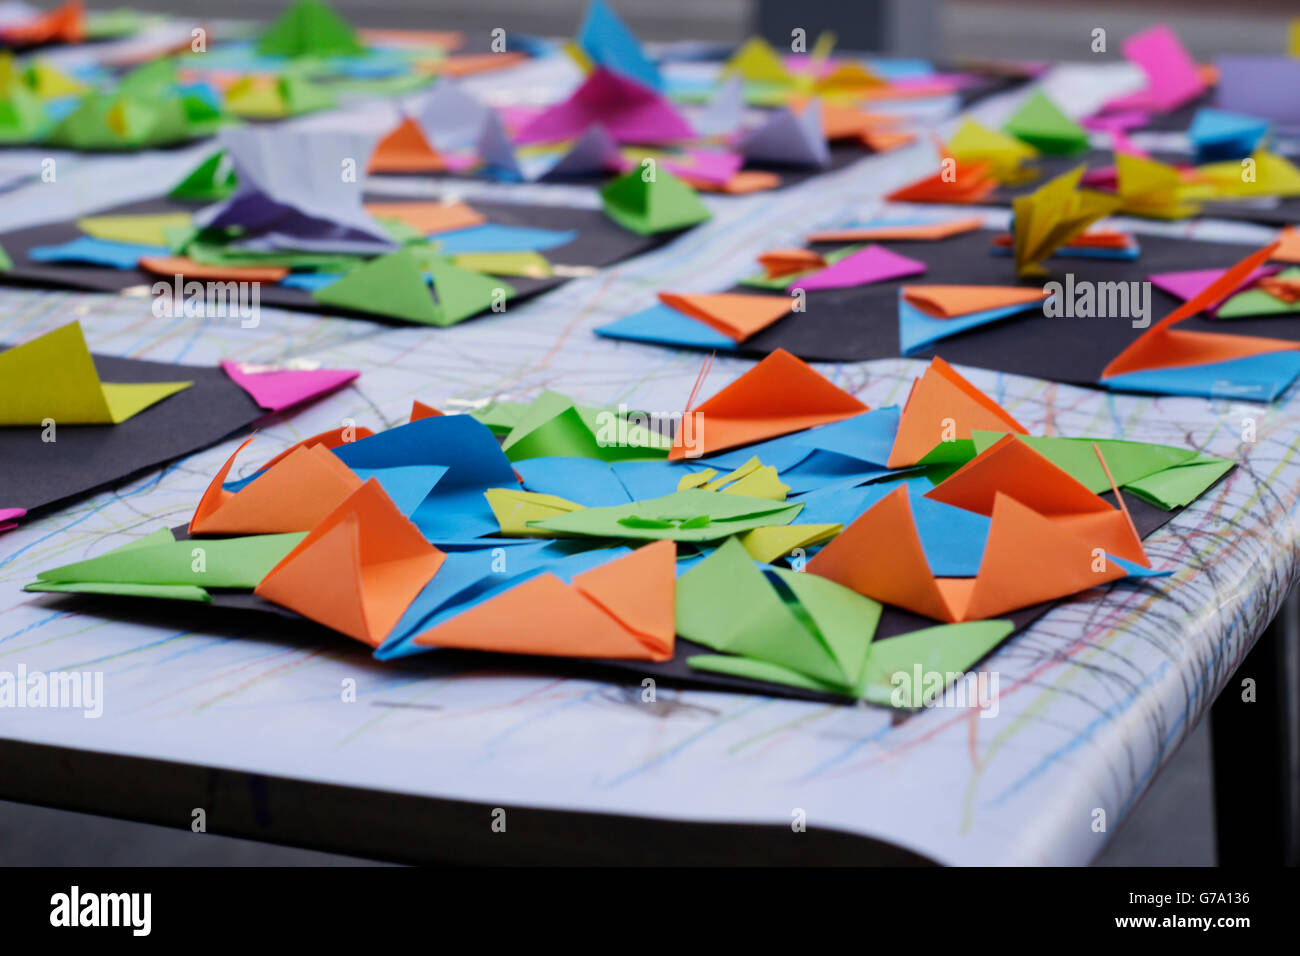 Photograph of some colorful geometric paper origamis Stock Photo